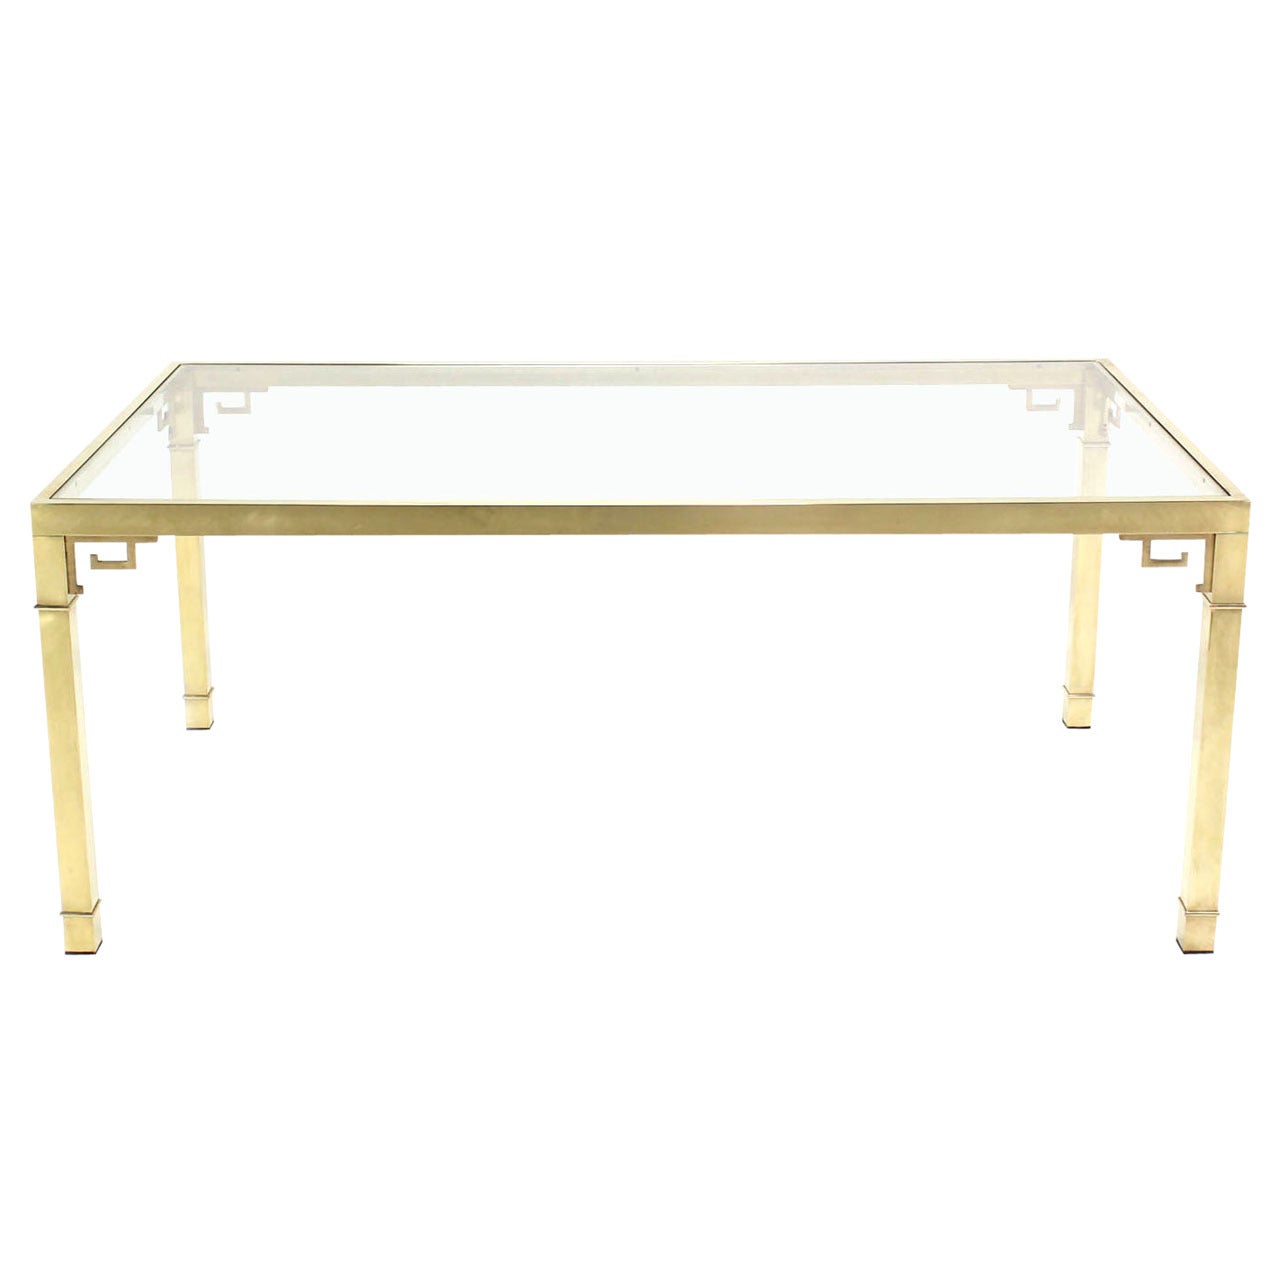 Solid Brass Greek Key Design Dining Table by Mastercraft